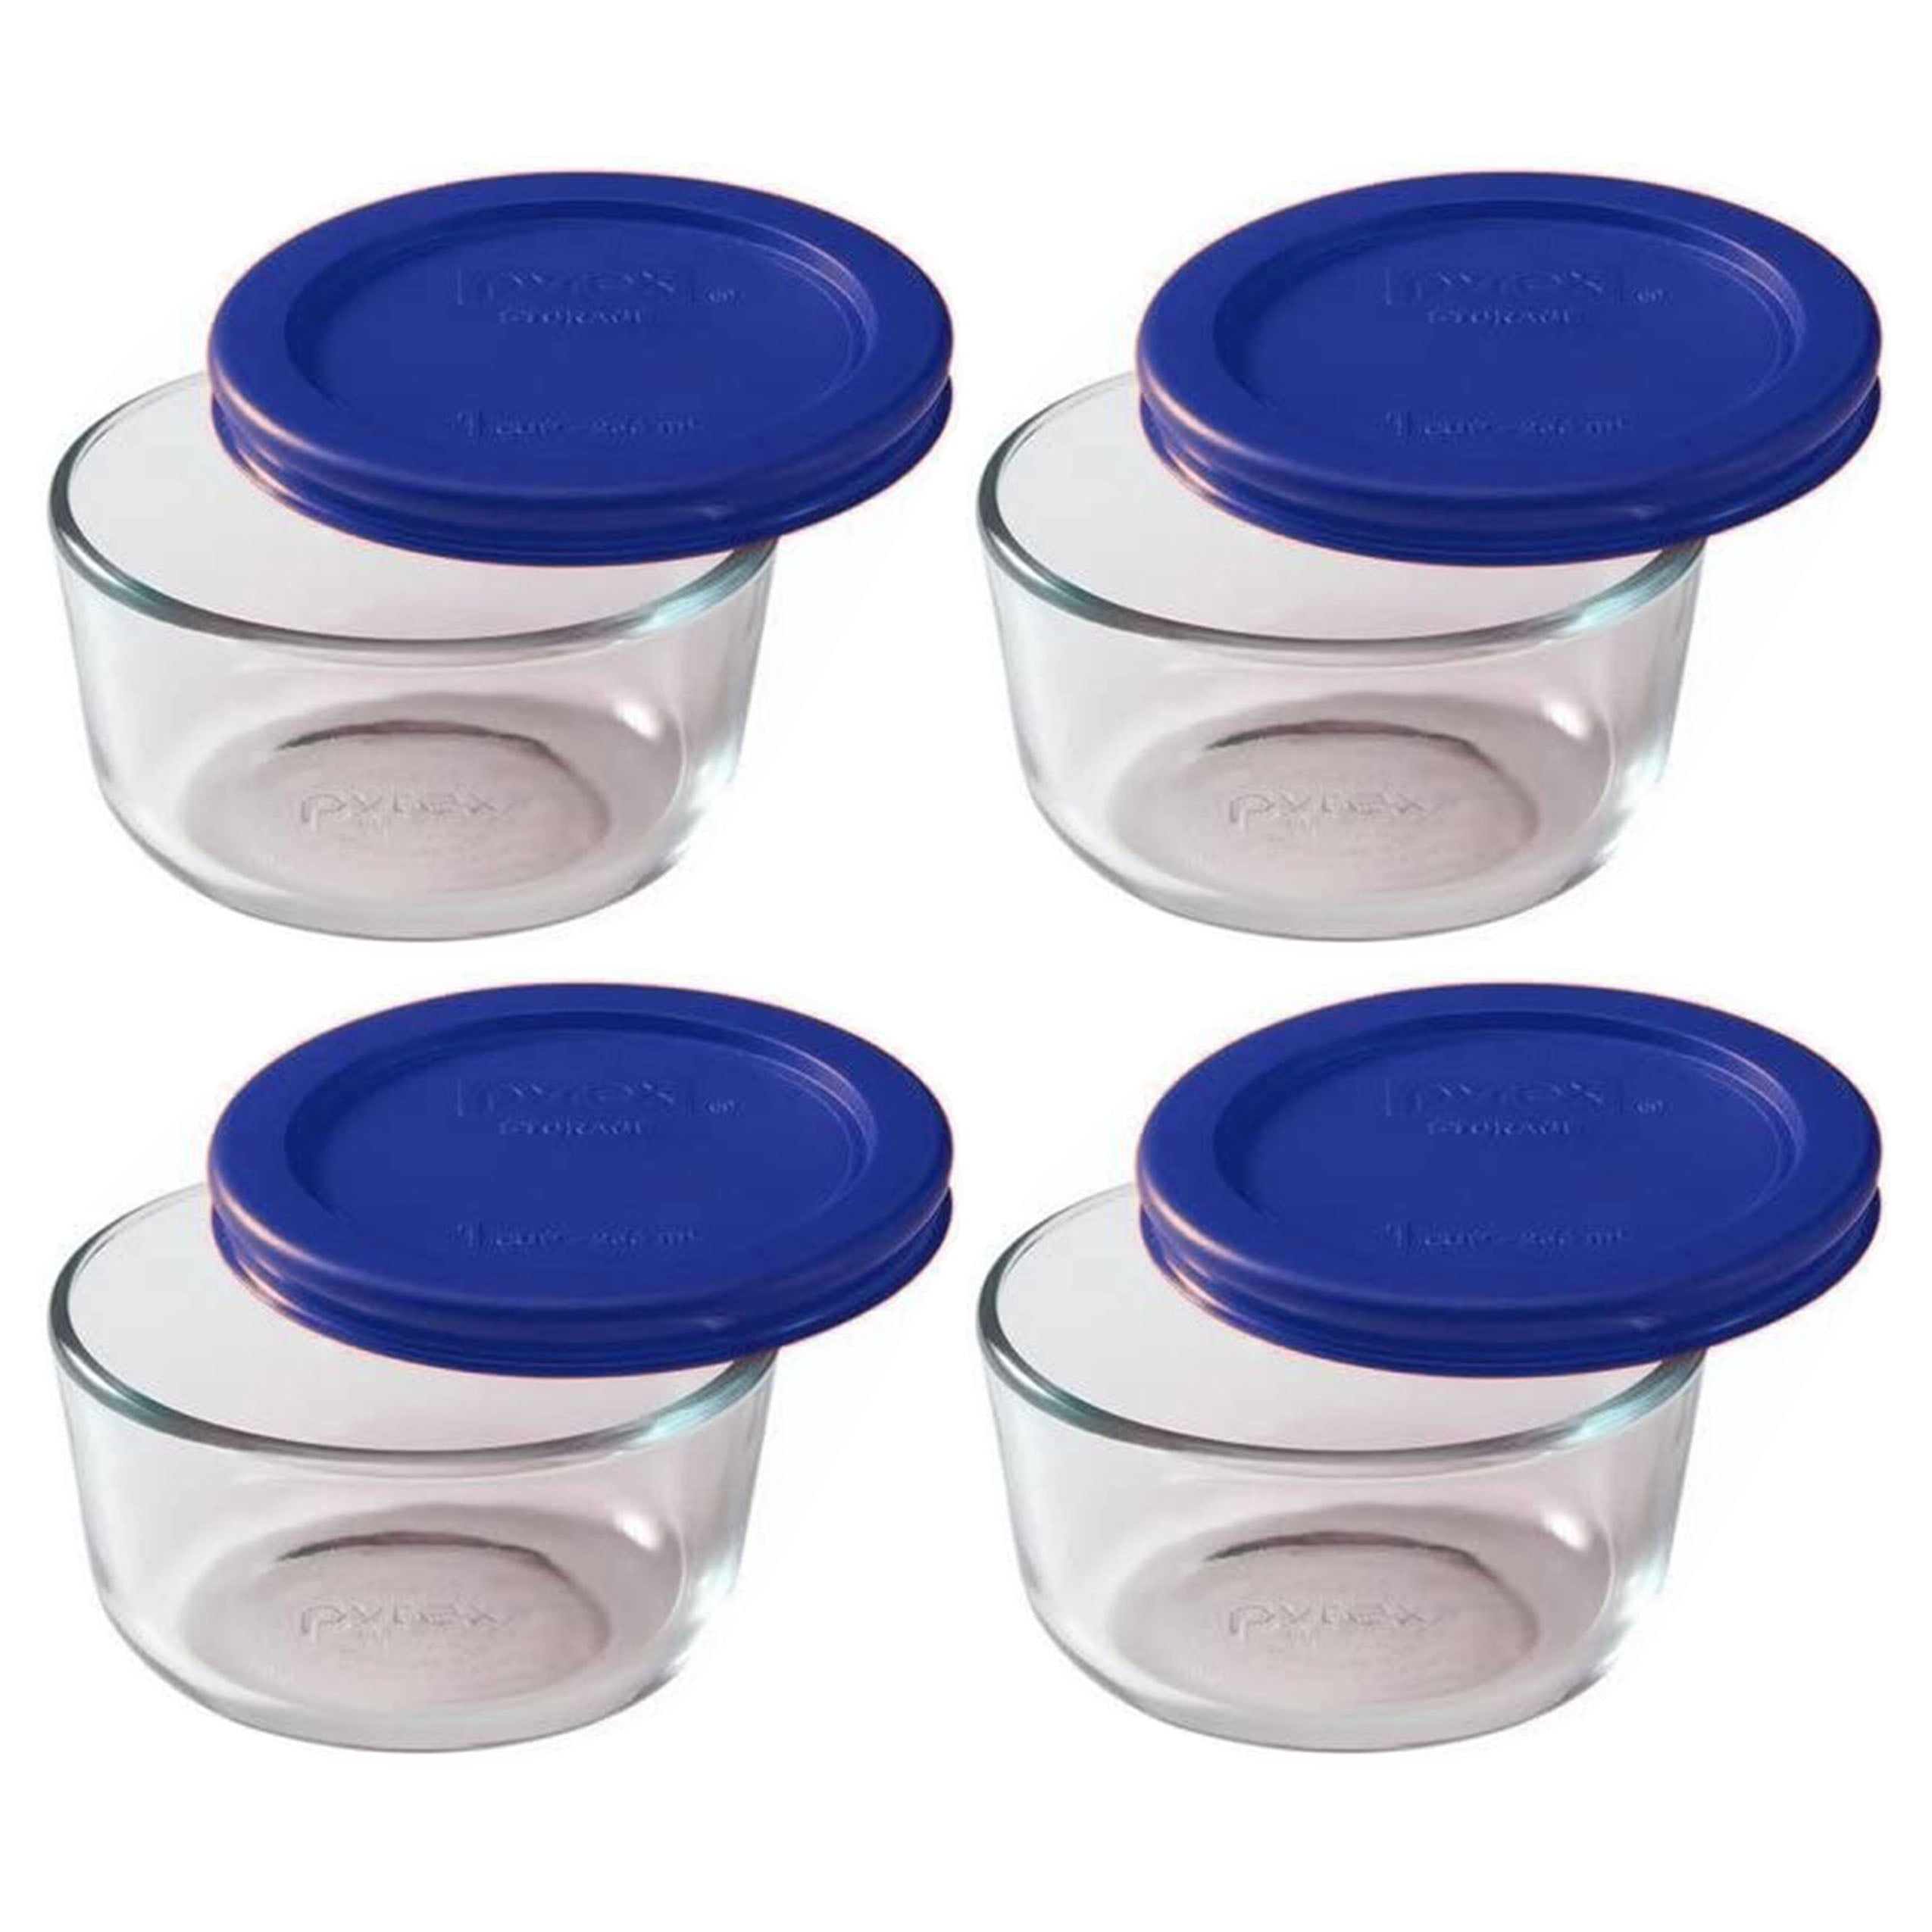 Pyrex Portables Large Hot/Cold Unipack (2-Pack)